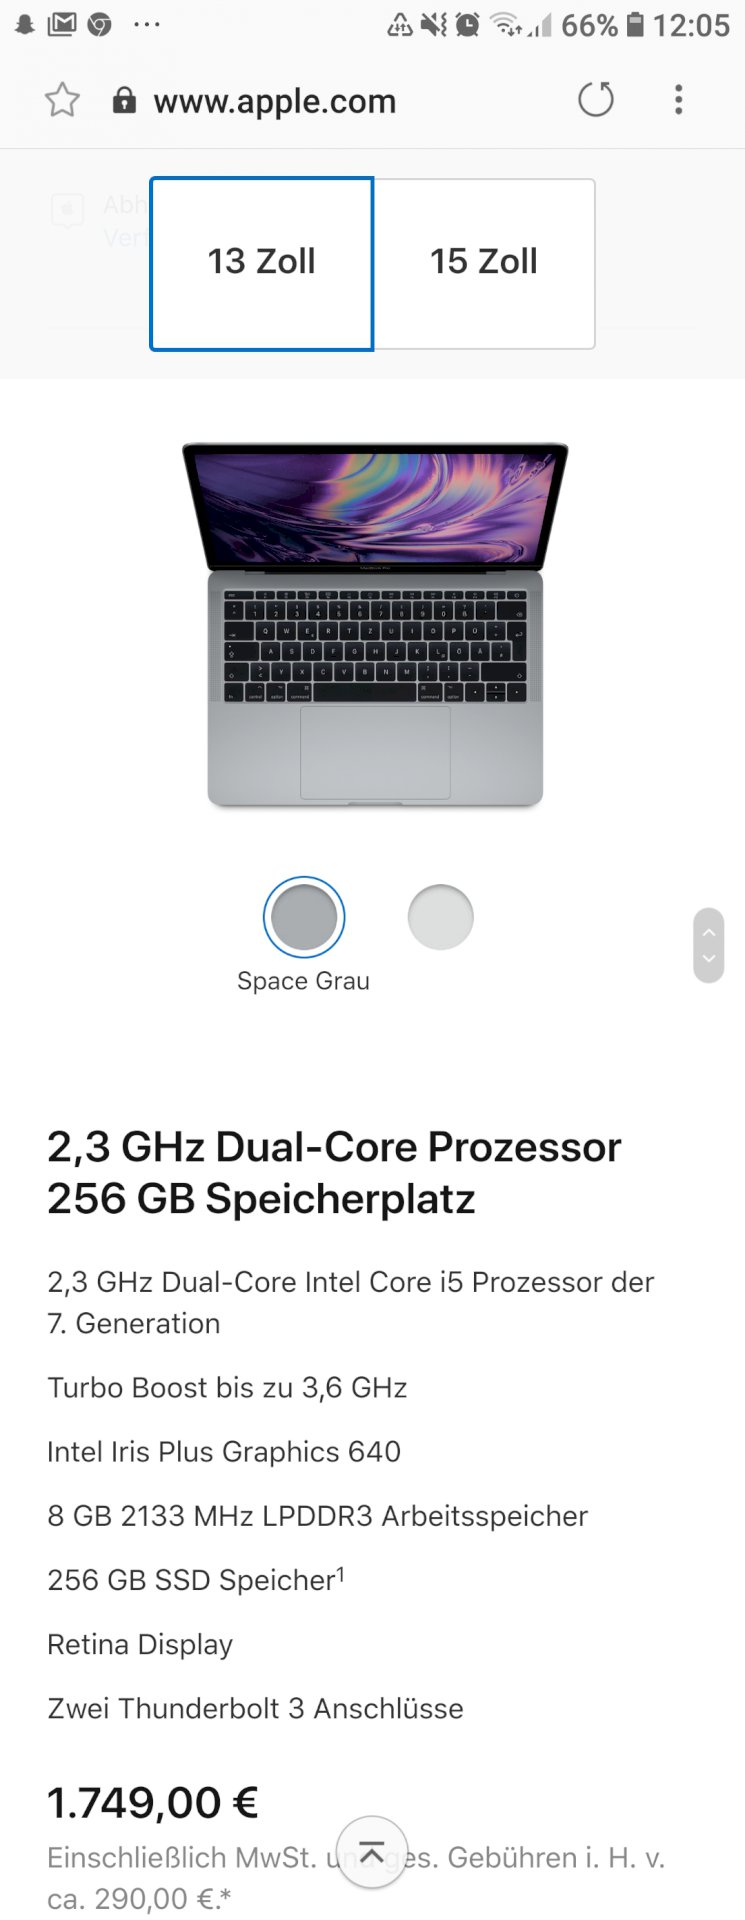 Macbook Air 2018 or Macbook Pro 13 without Touchbar - 1